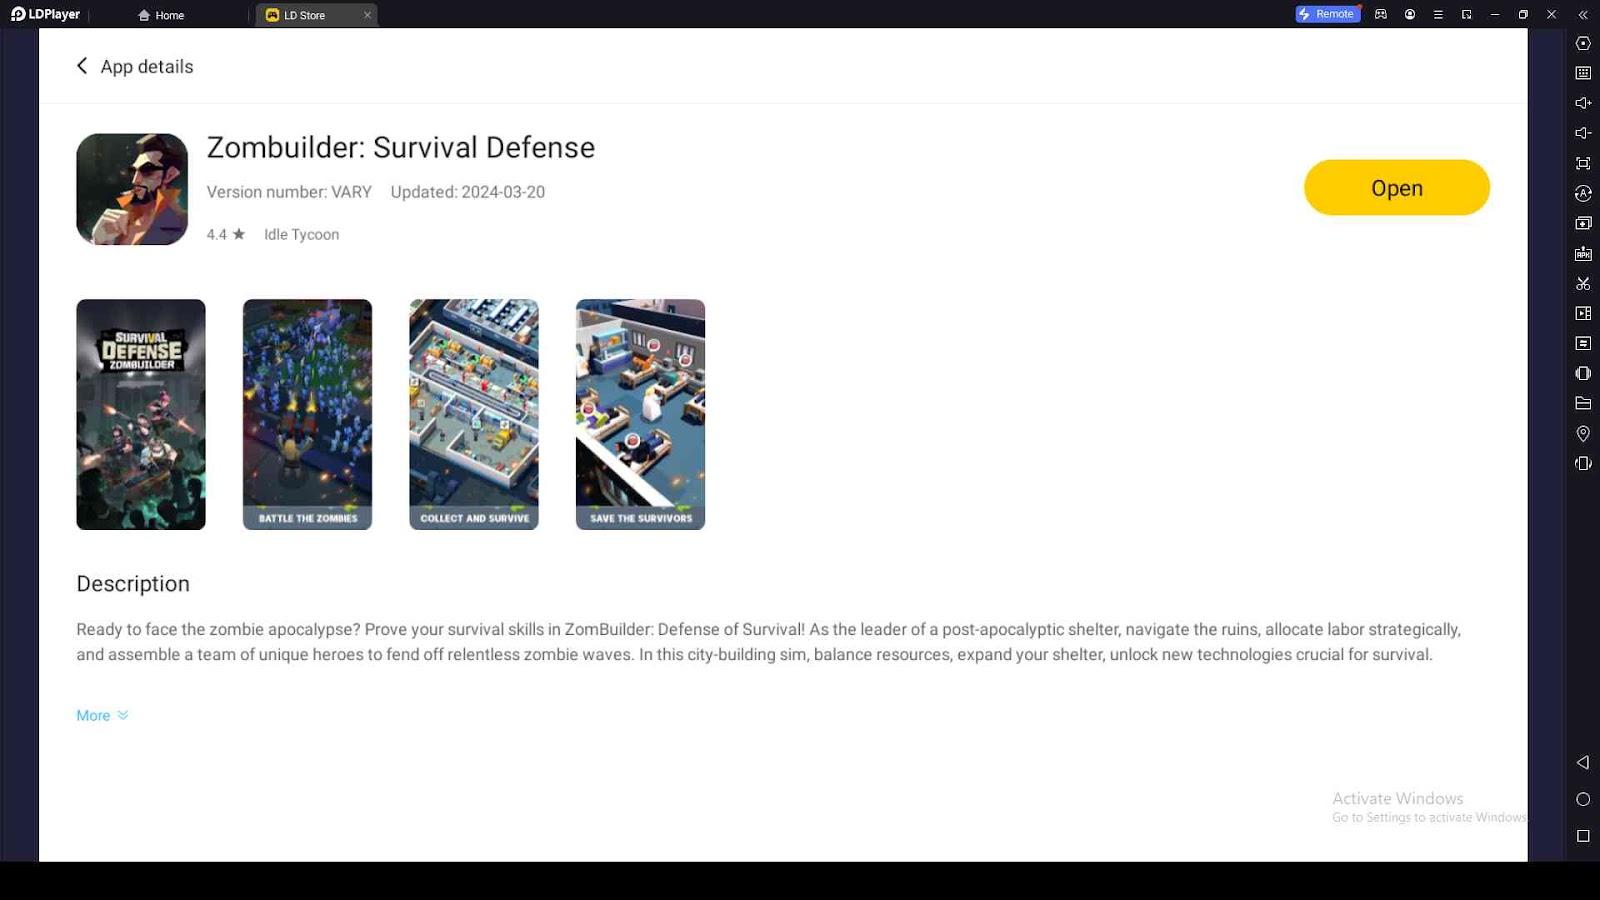 Playing Zombuilder: Survival Defense on PC with LDPlayer